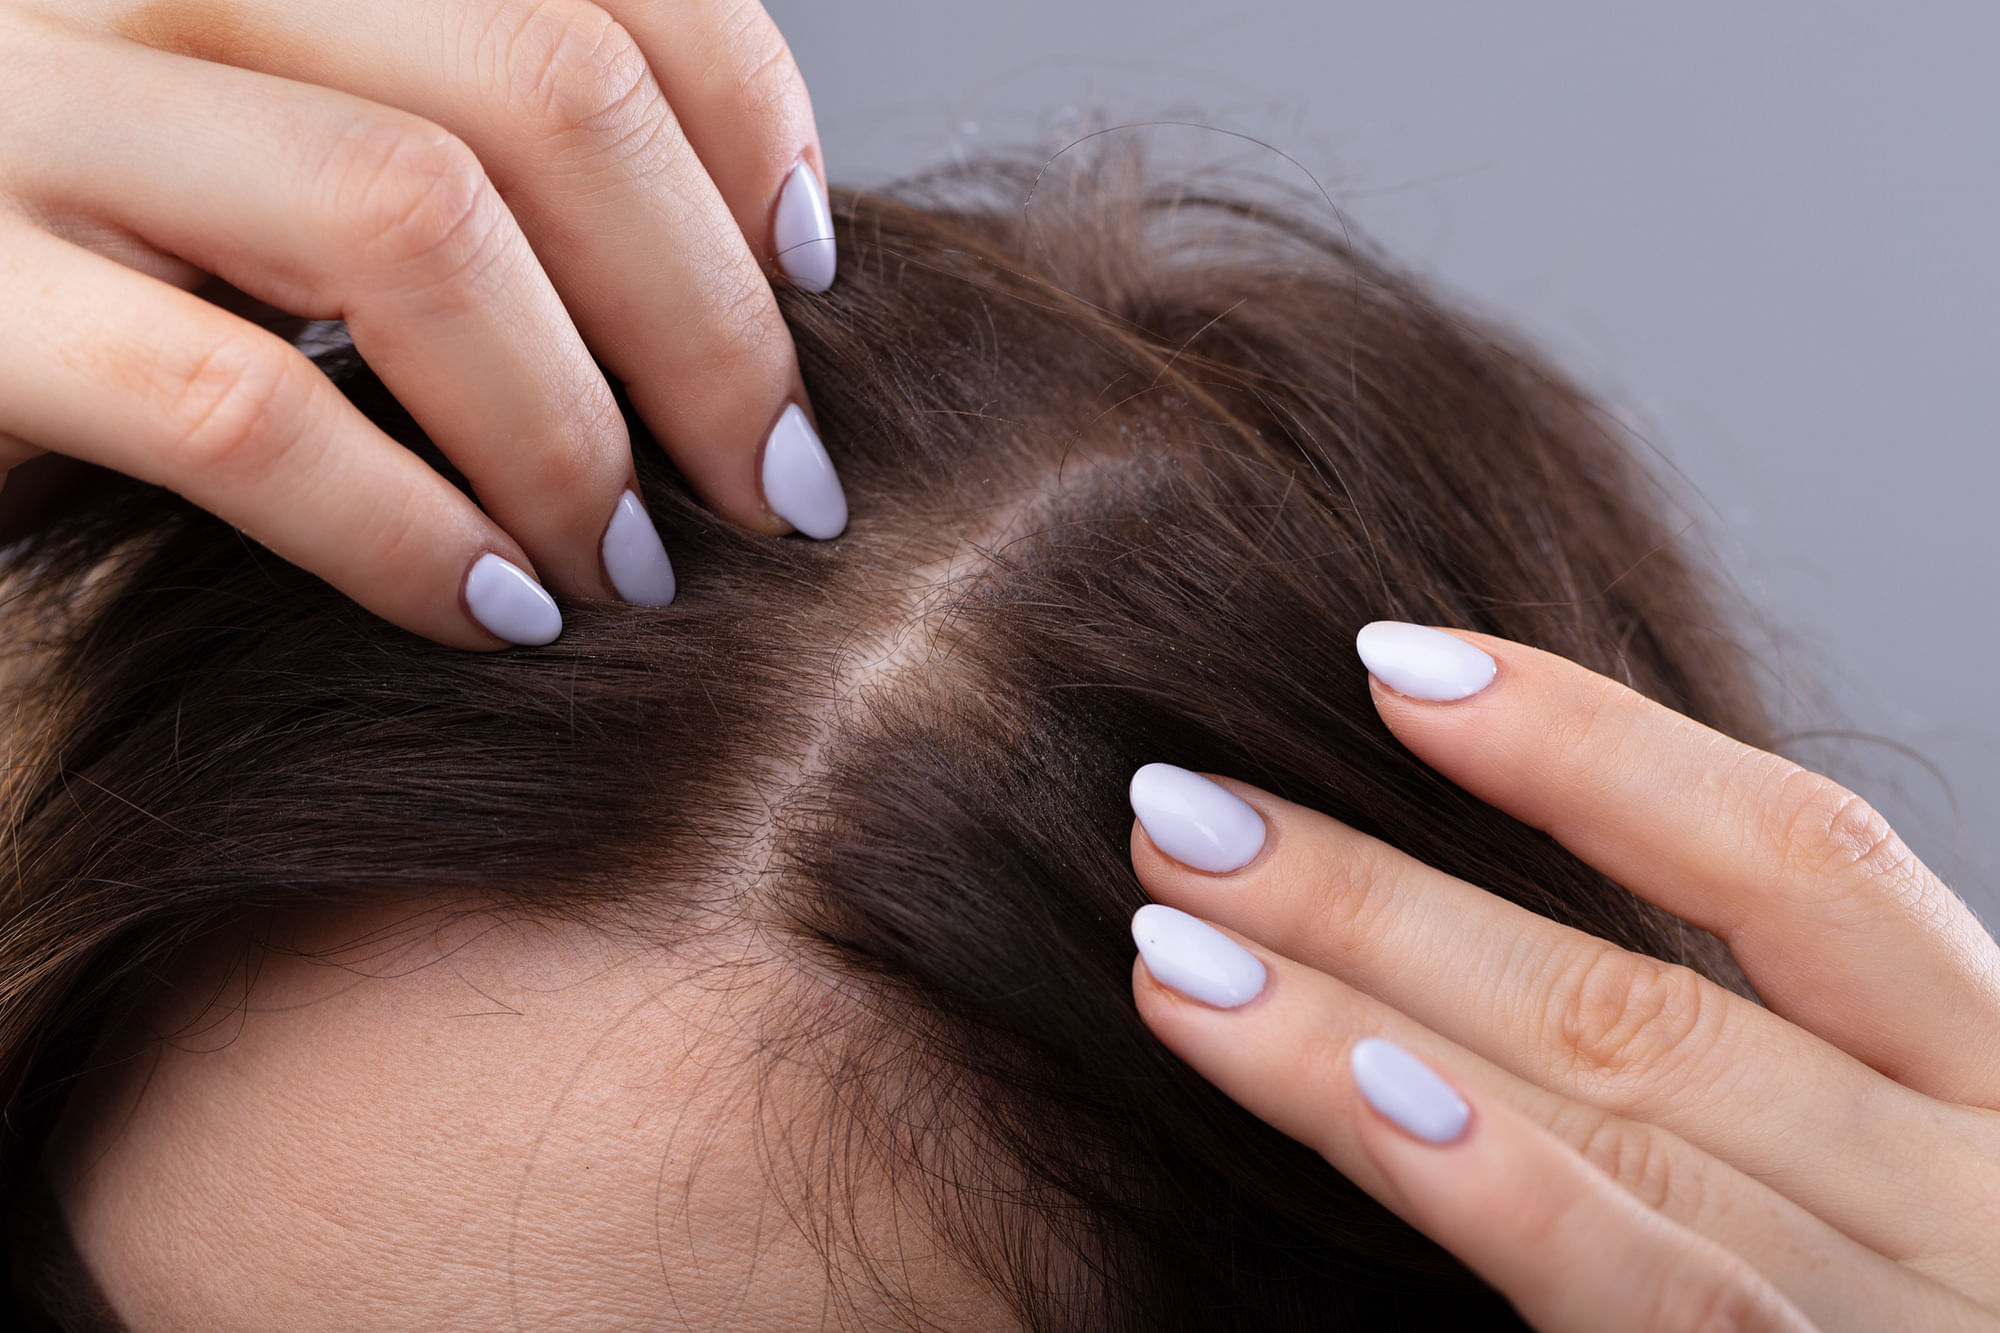 Ayurveda Remedies For Hair Loss and Dandruff: Our quest for pretty hair often leads to frustration and unhappiness.